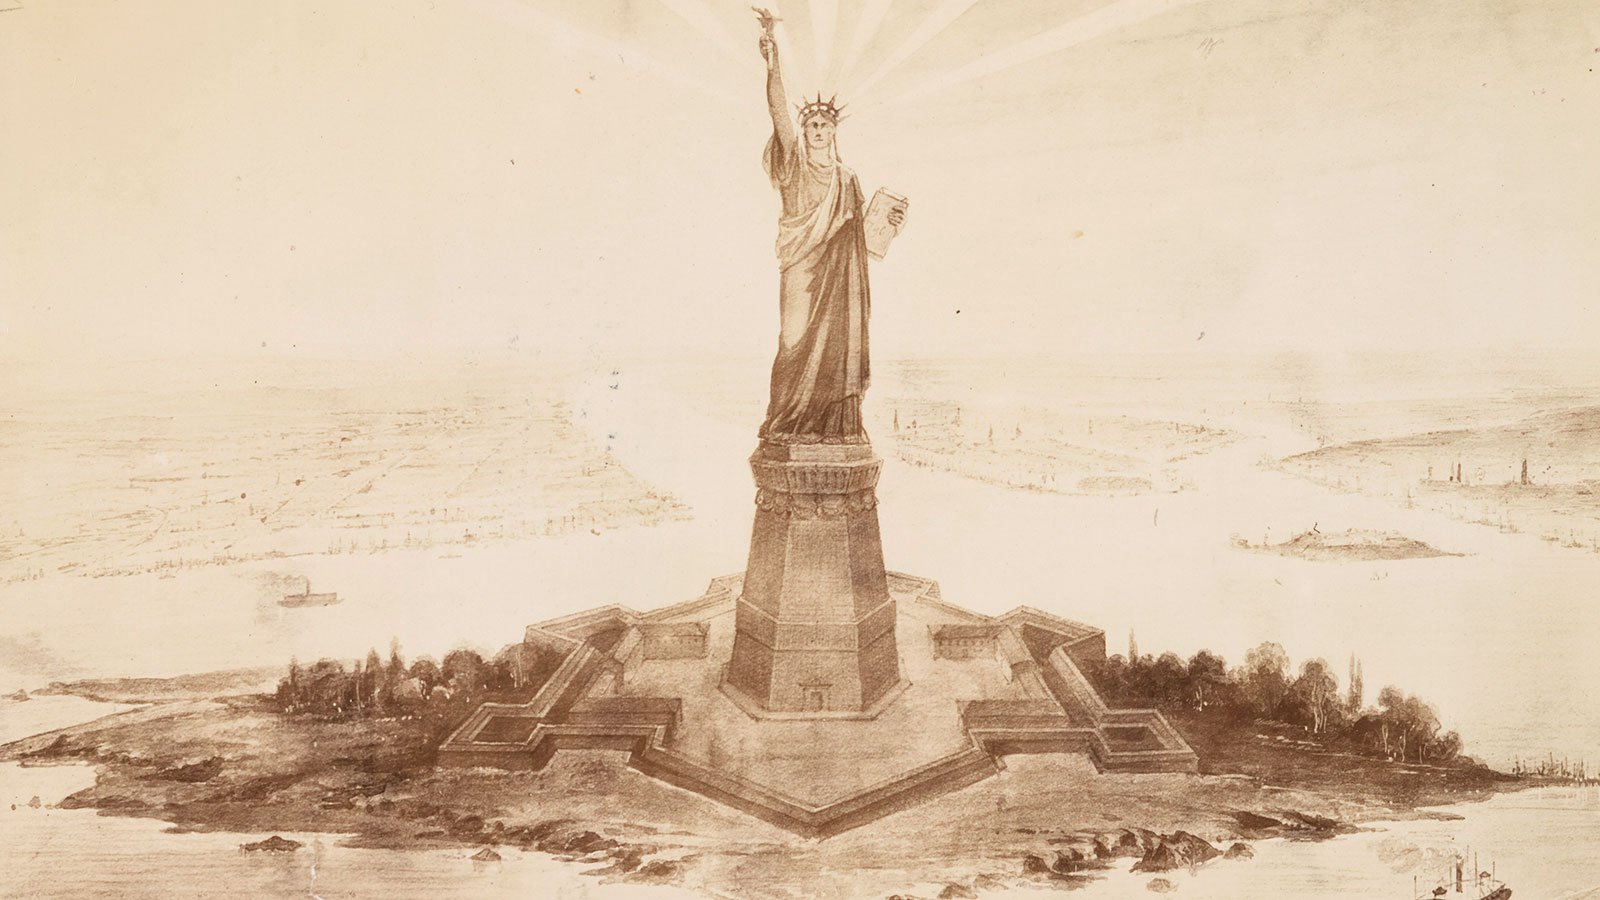 drawing of the Statue of Liberty in Upper New York Bay, 1883